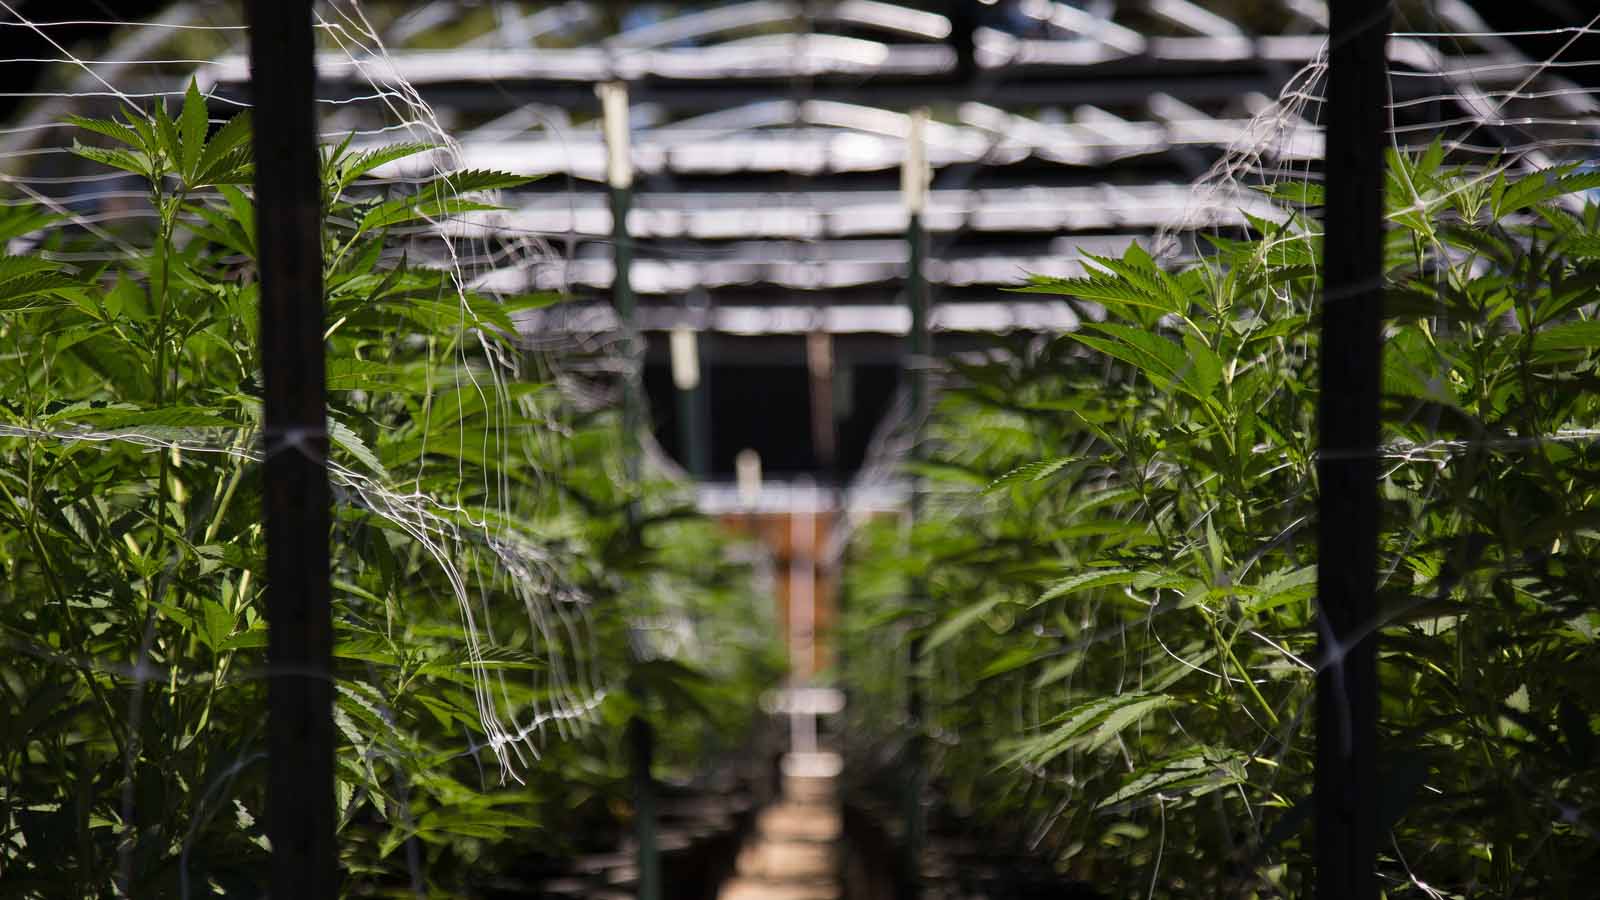 Sndl Stock Why Cannabis Play Sundial Is Surging Monday Investorplace